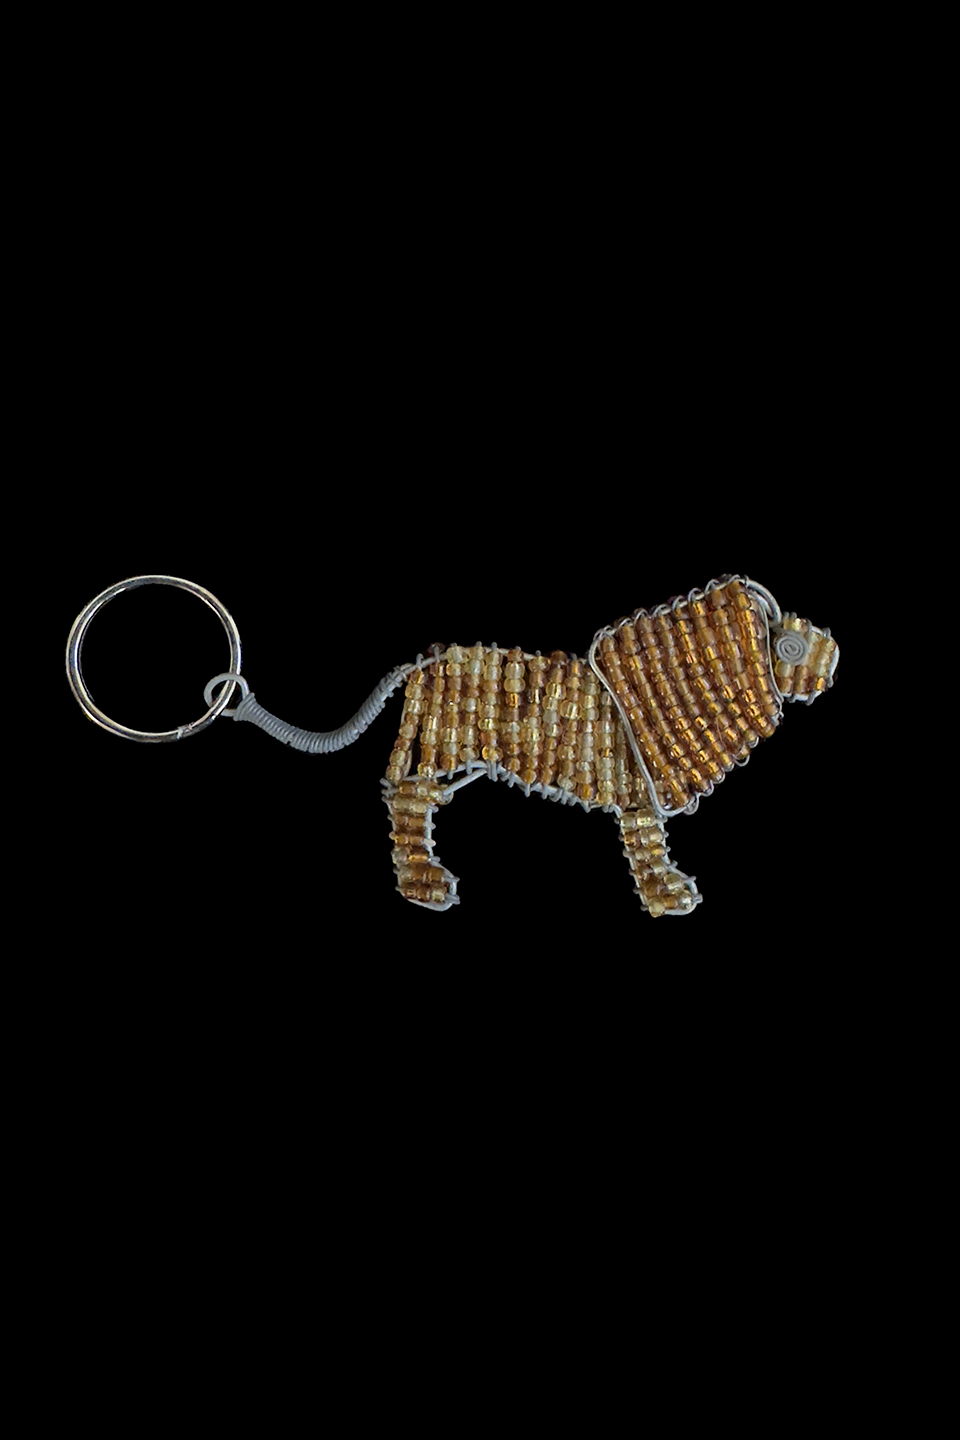 Bead and Wire Lion Key Ring - South Africa (only 1 left!)